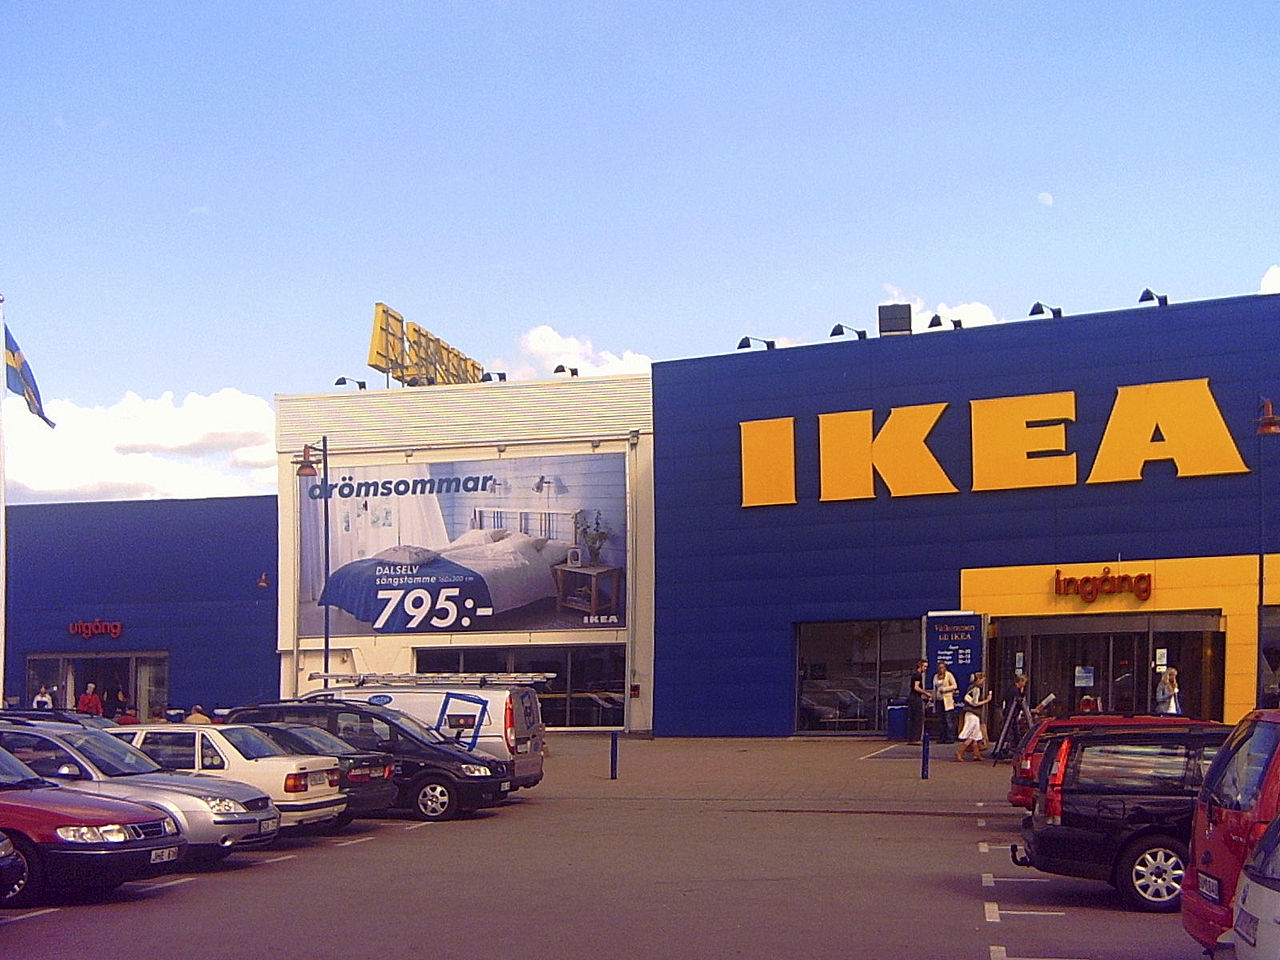 IKEA Headquarters in lmhult, Sweden. Photo: Wikimedia Commons